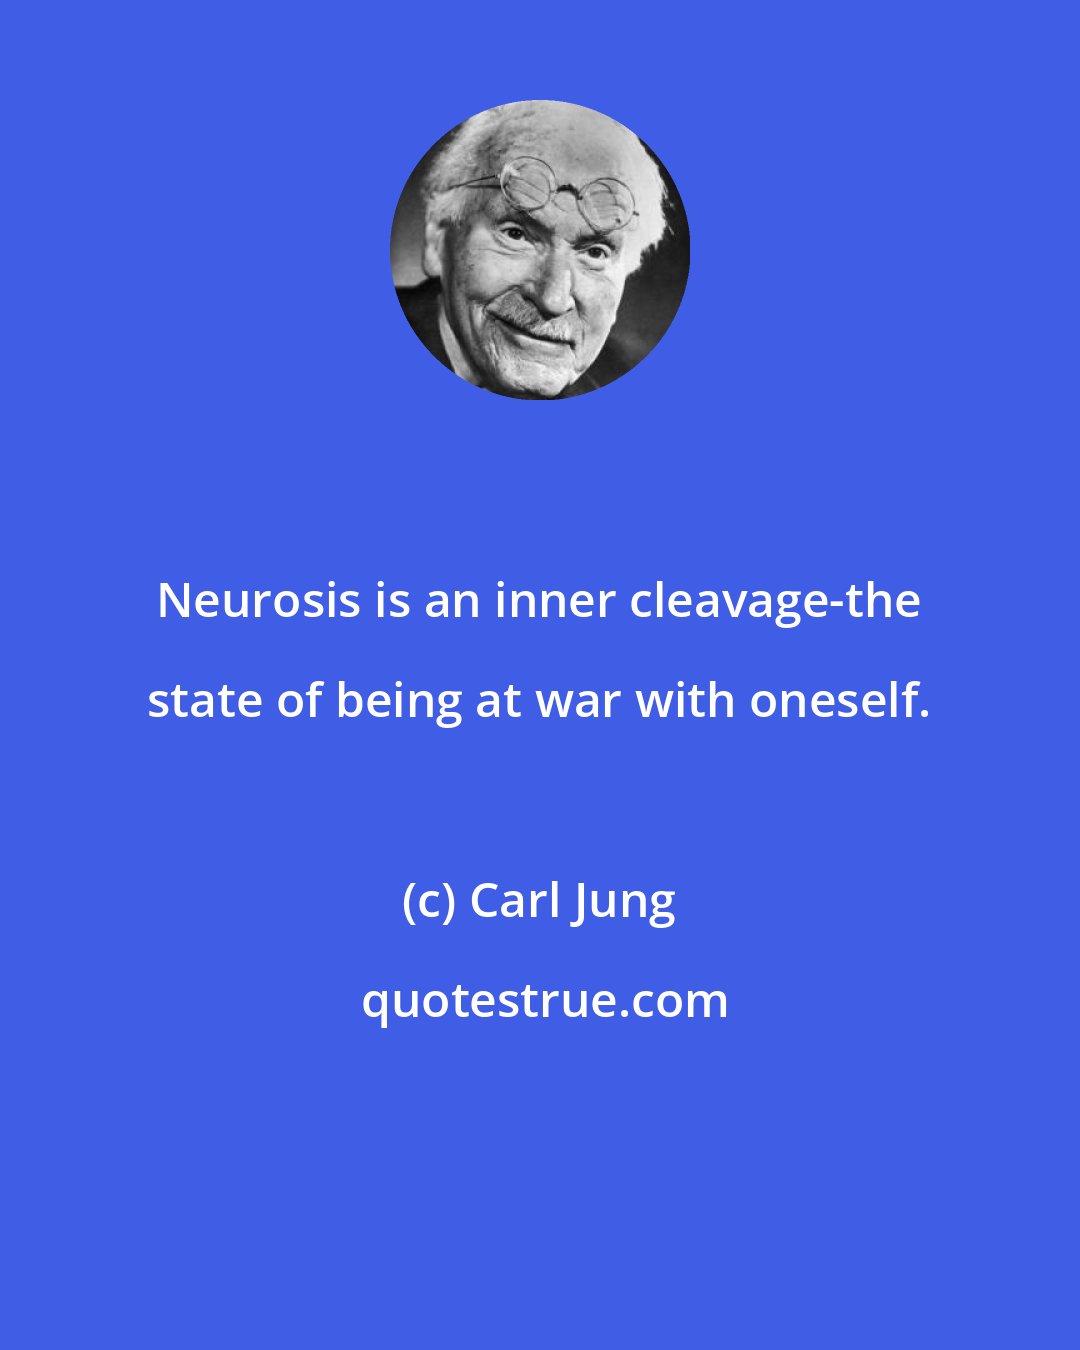 Carl Jung: Neurosis is an inner cleavage-the state of being at war with oneself.